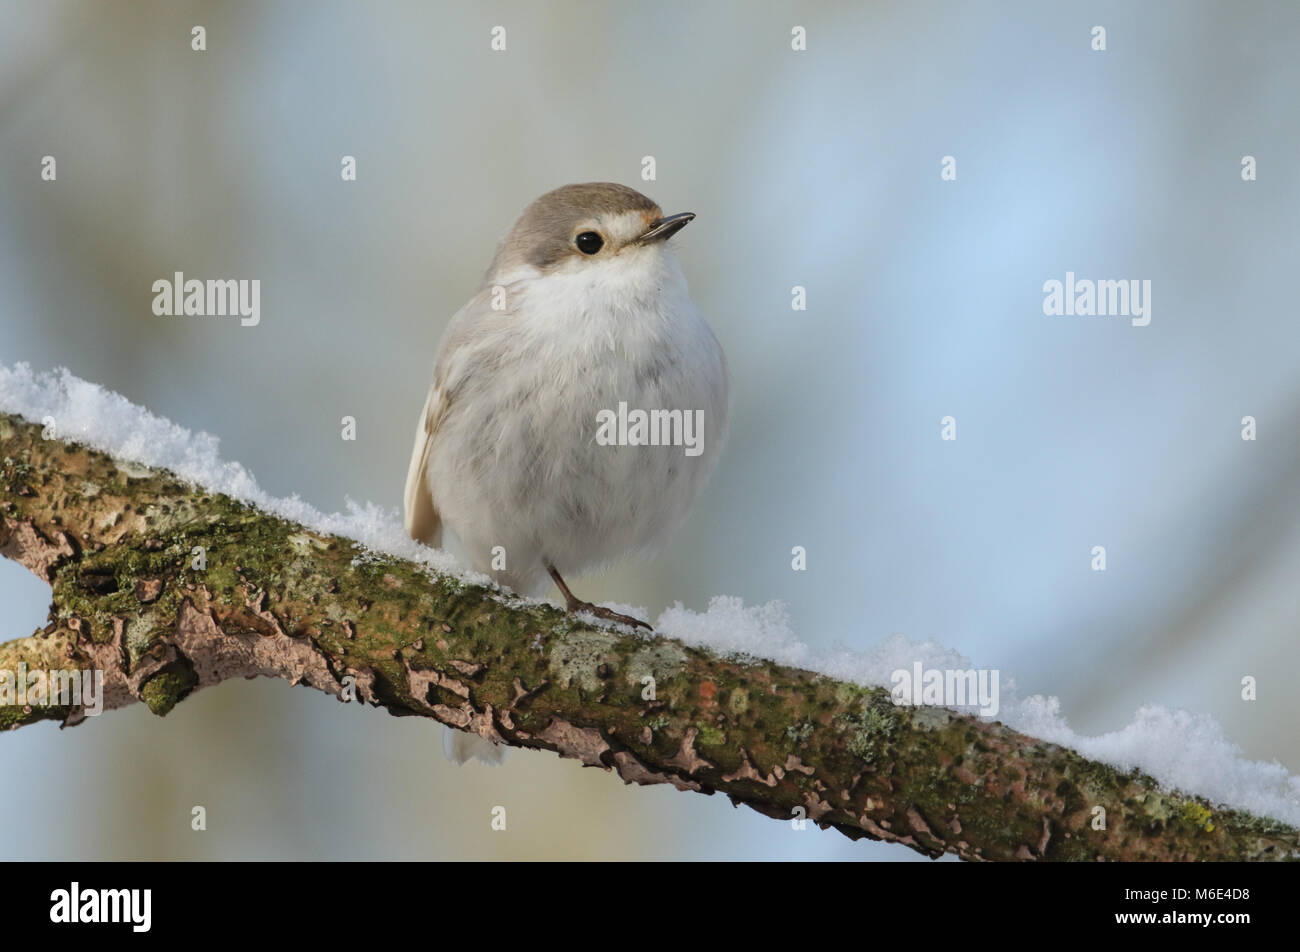 A rare Leucistic Robin (Erithacus rubecula) perched on a branch covered in snow during a snowstorm. Stock Photo